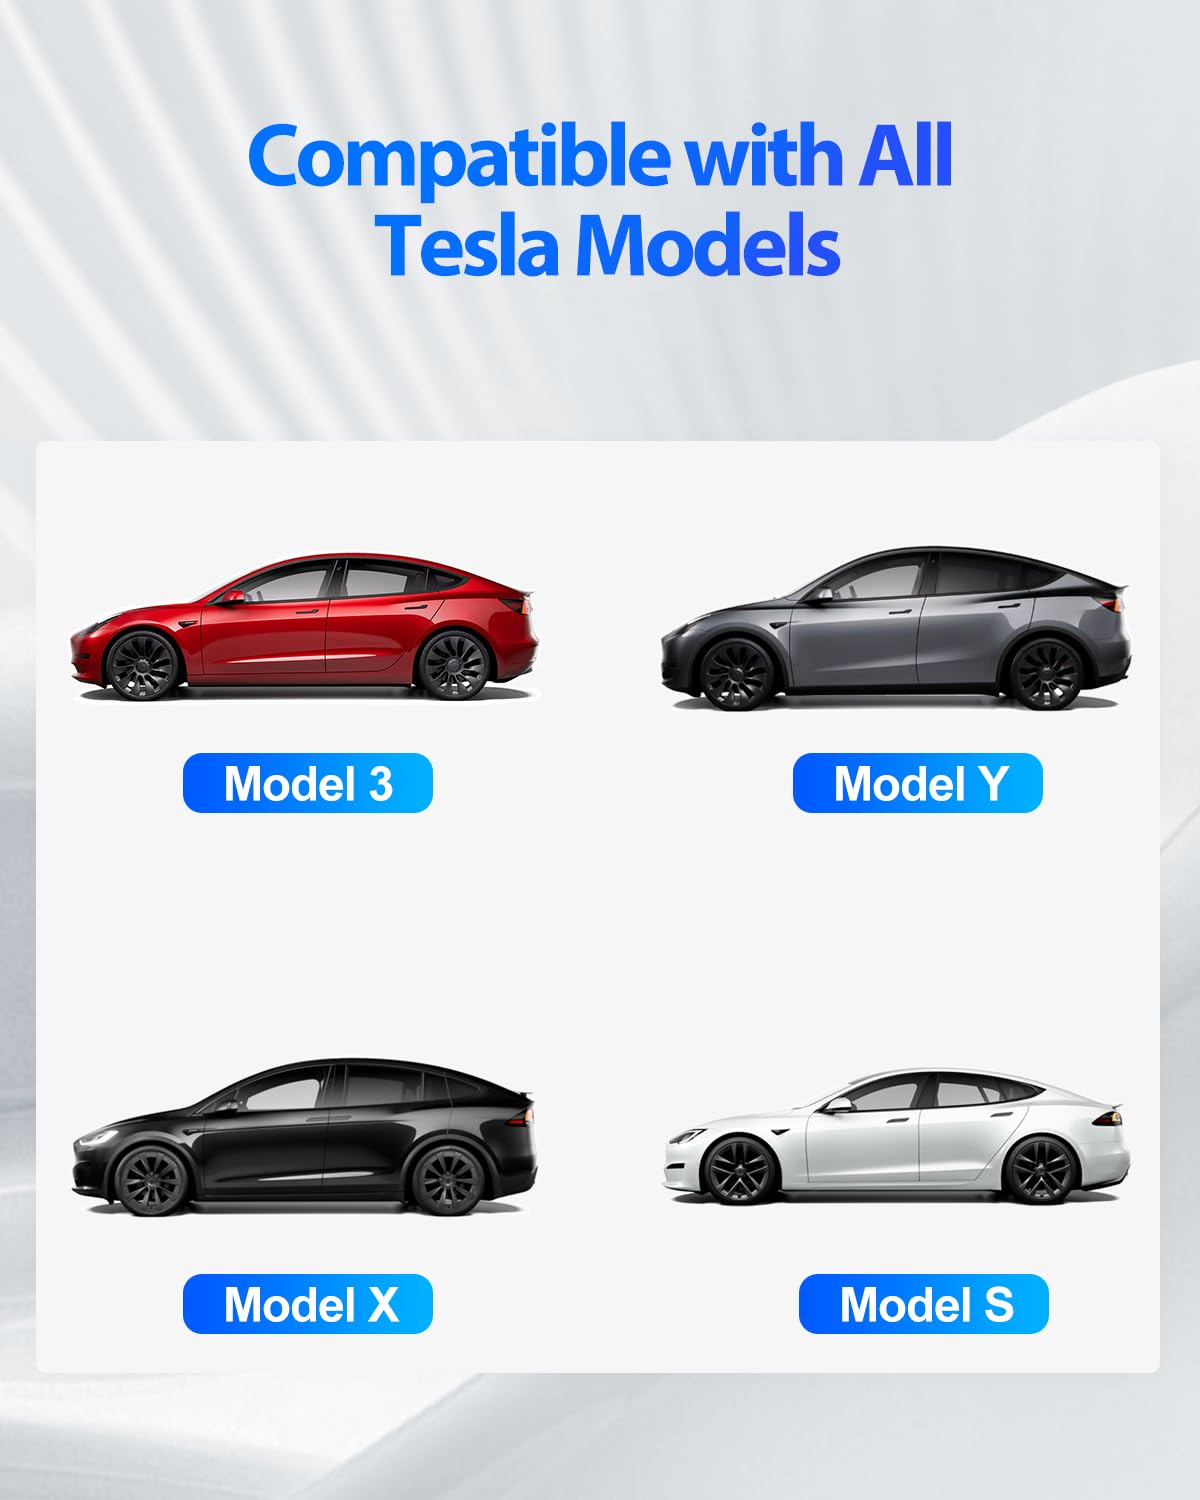 Comatible with all tesla models